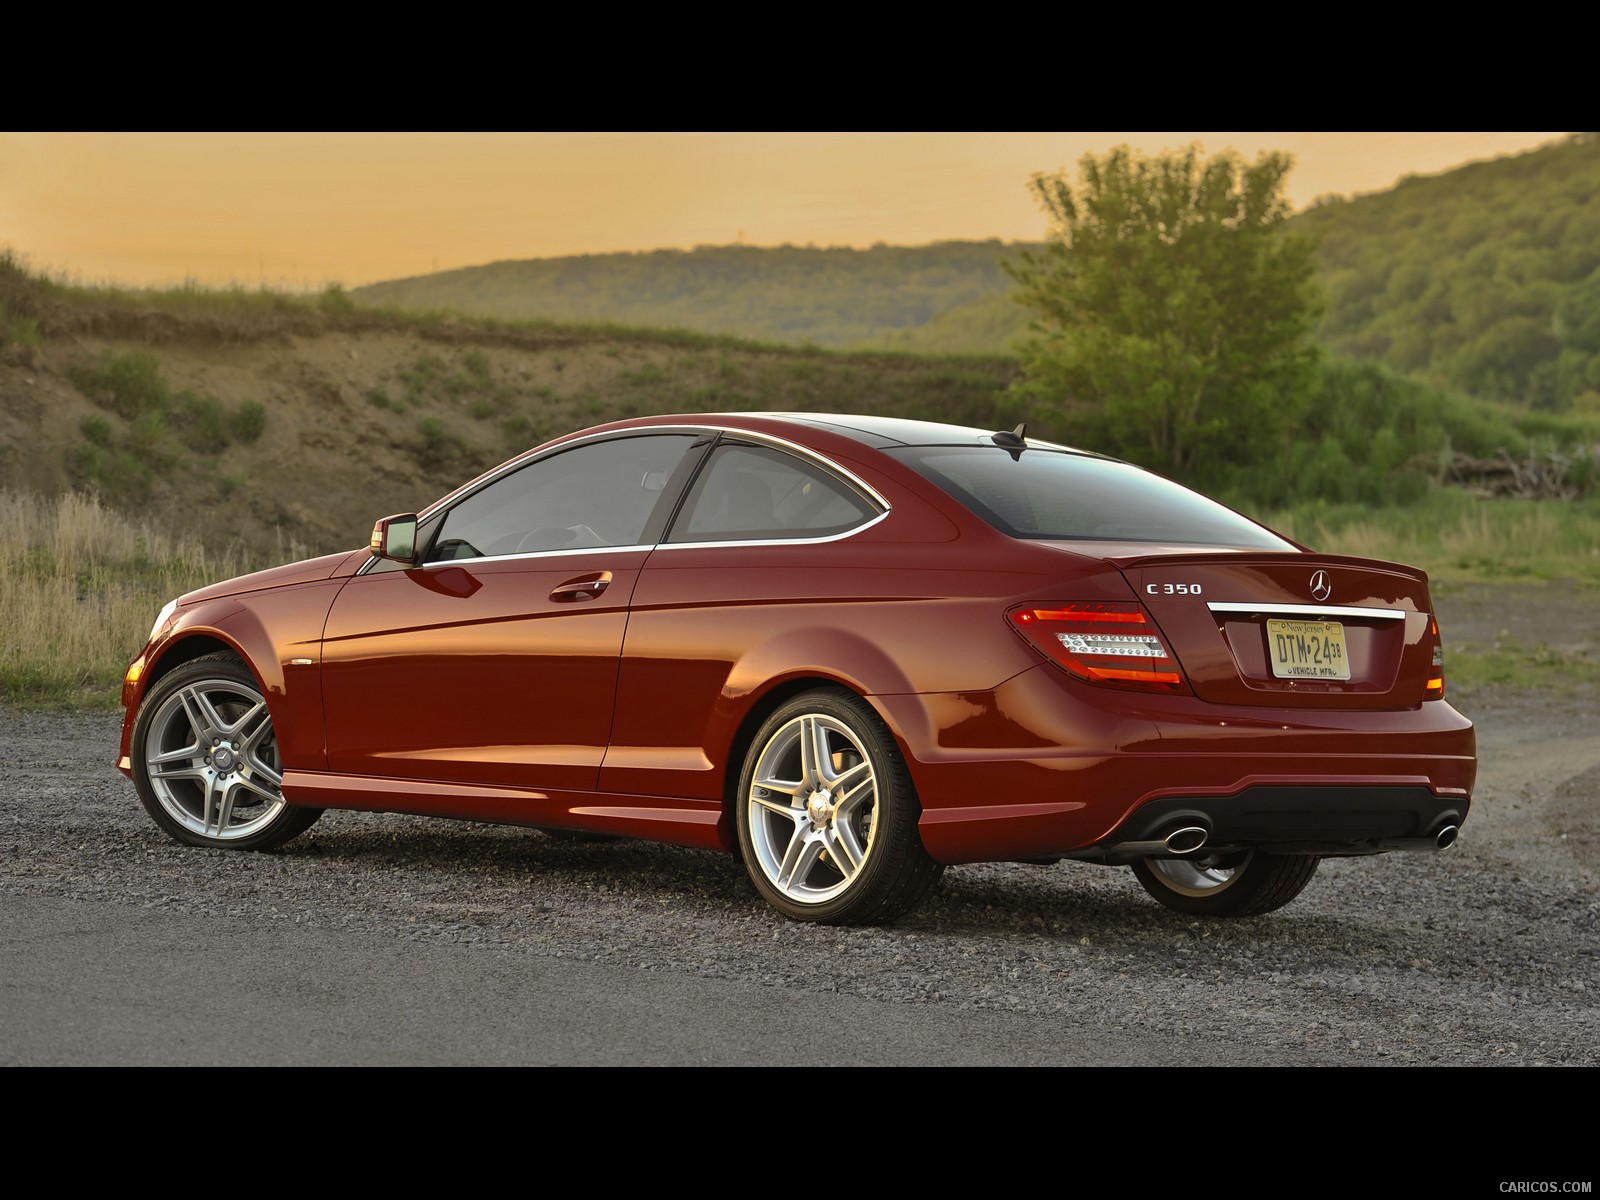 Mercedes-Benz C-Class Coupe (2012)  - Rear , #42 of 79